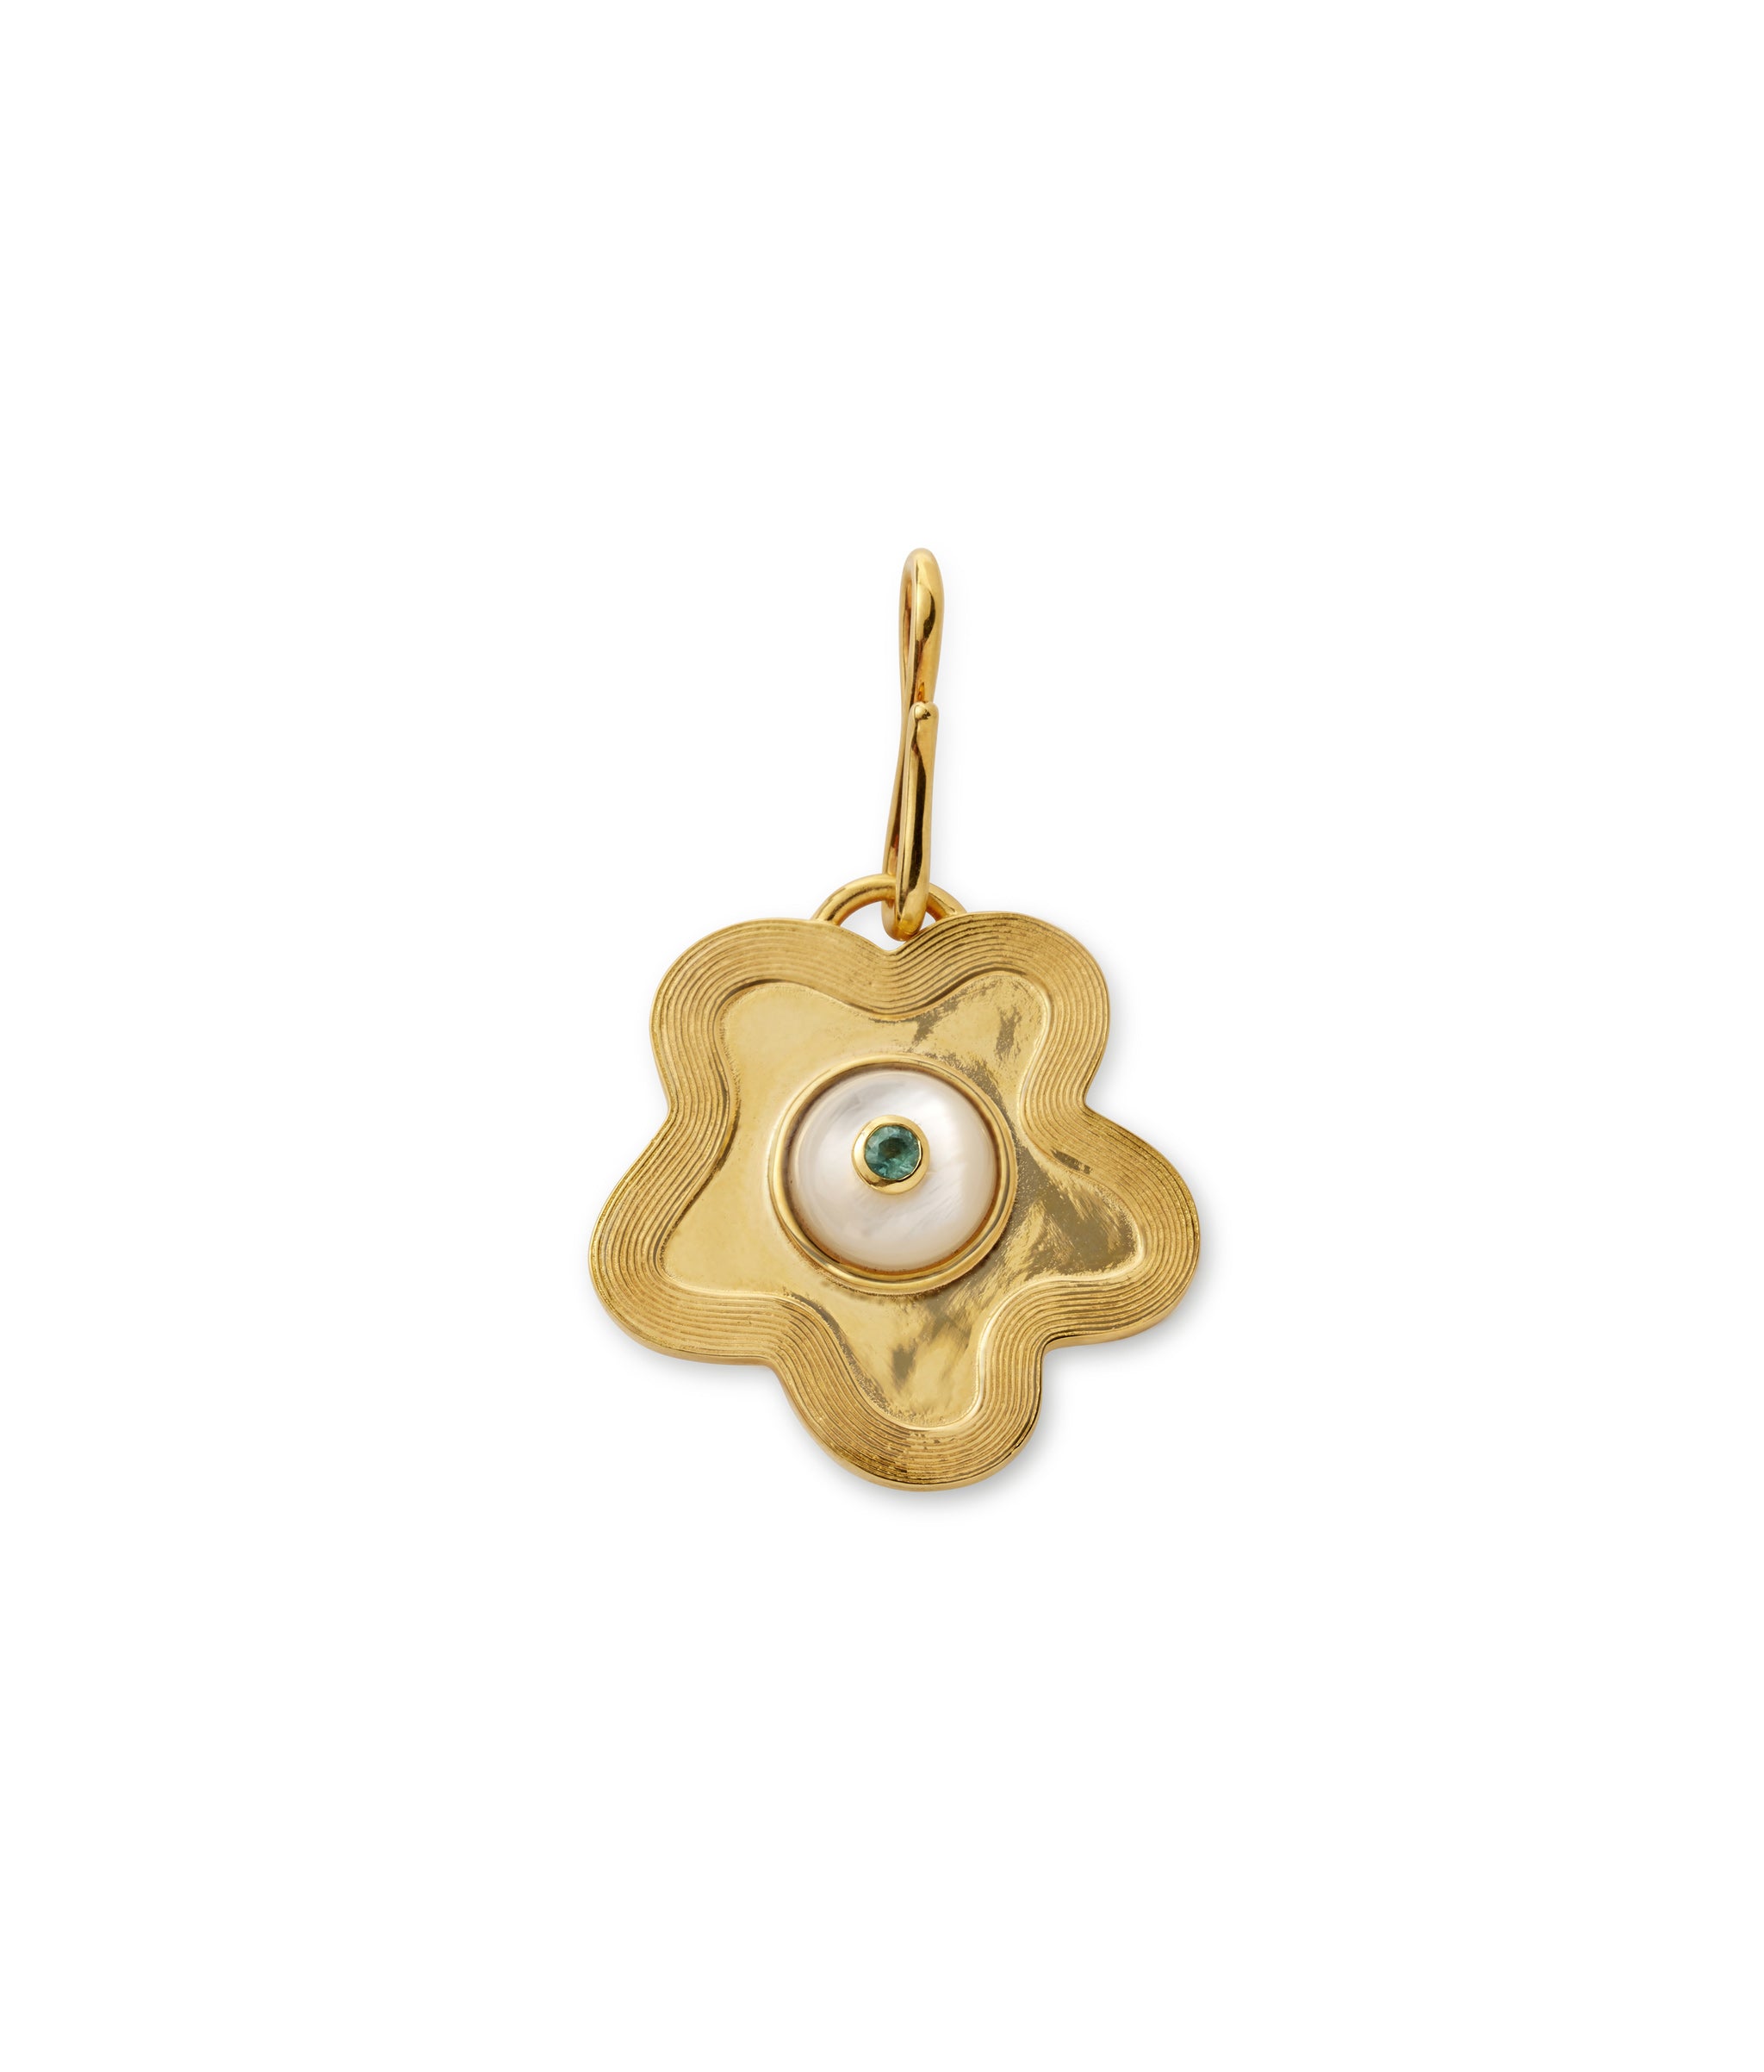 Nana Pendant in Poppy Pearl. Gold-plated etched daisy with mother-of-pearl cabochon, inlaid with emerald.